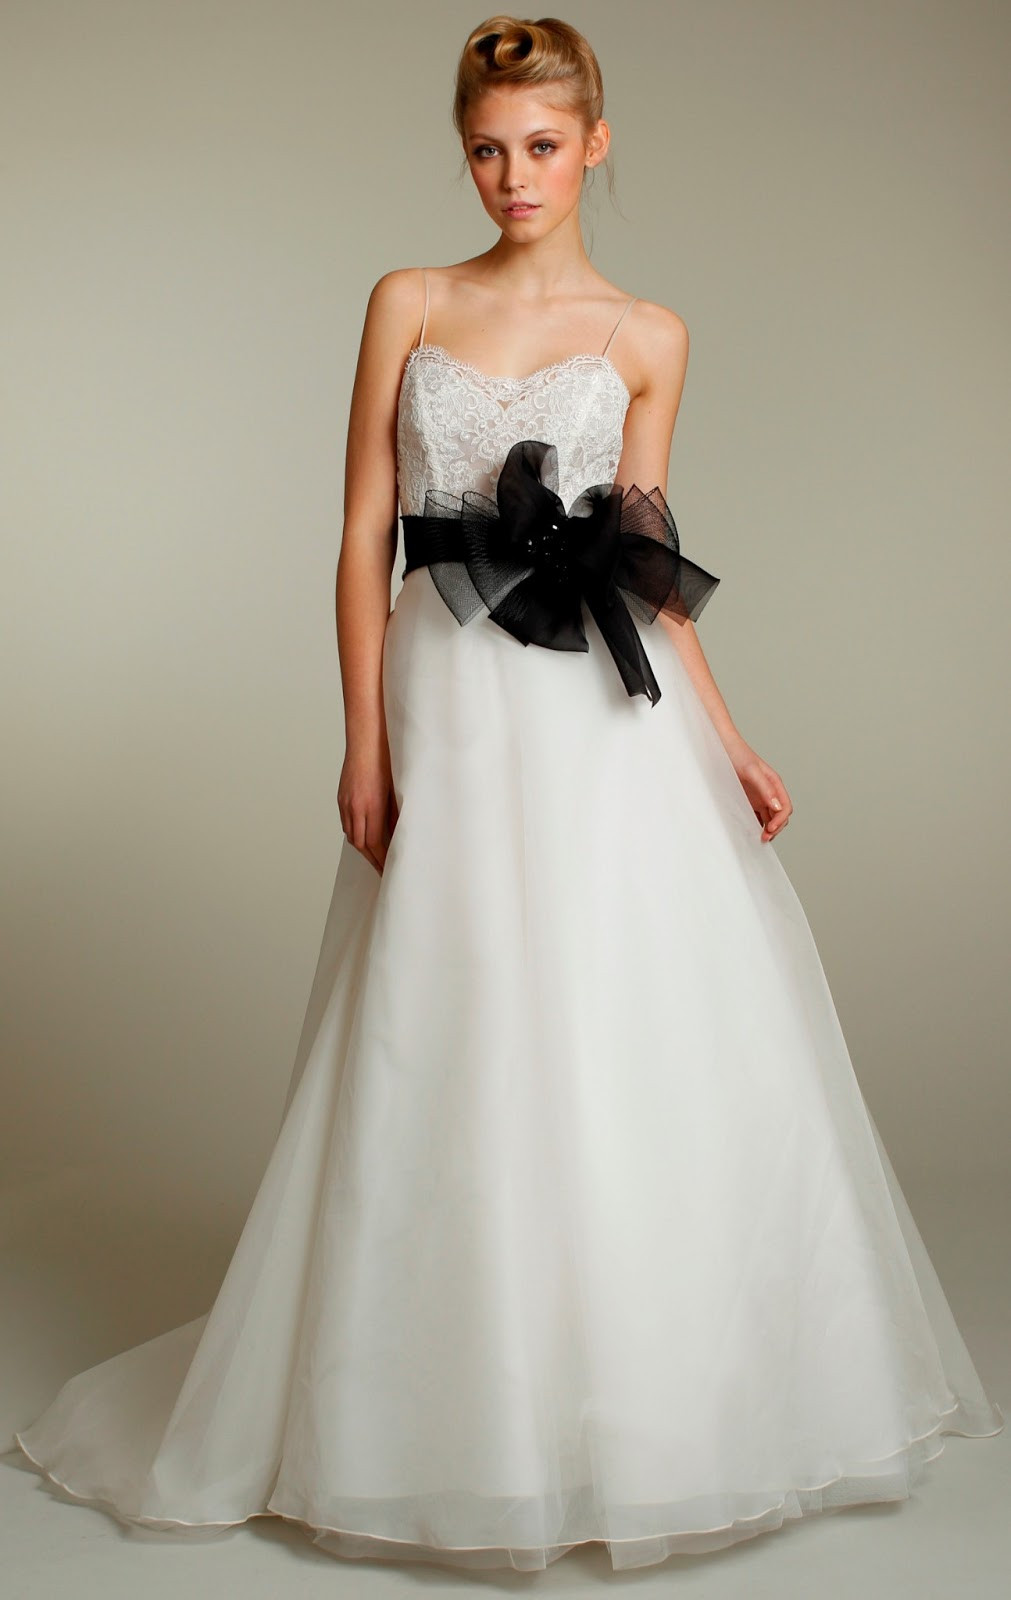 Wedding Gown Sashes
 Choose Your Fashion Style Wedding Dresses with Black Sashes